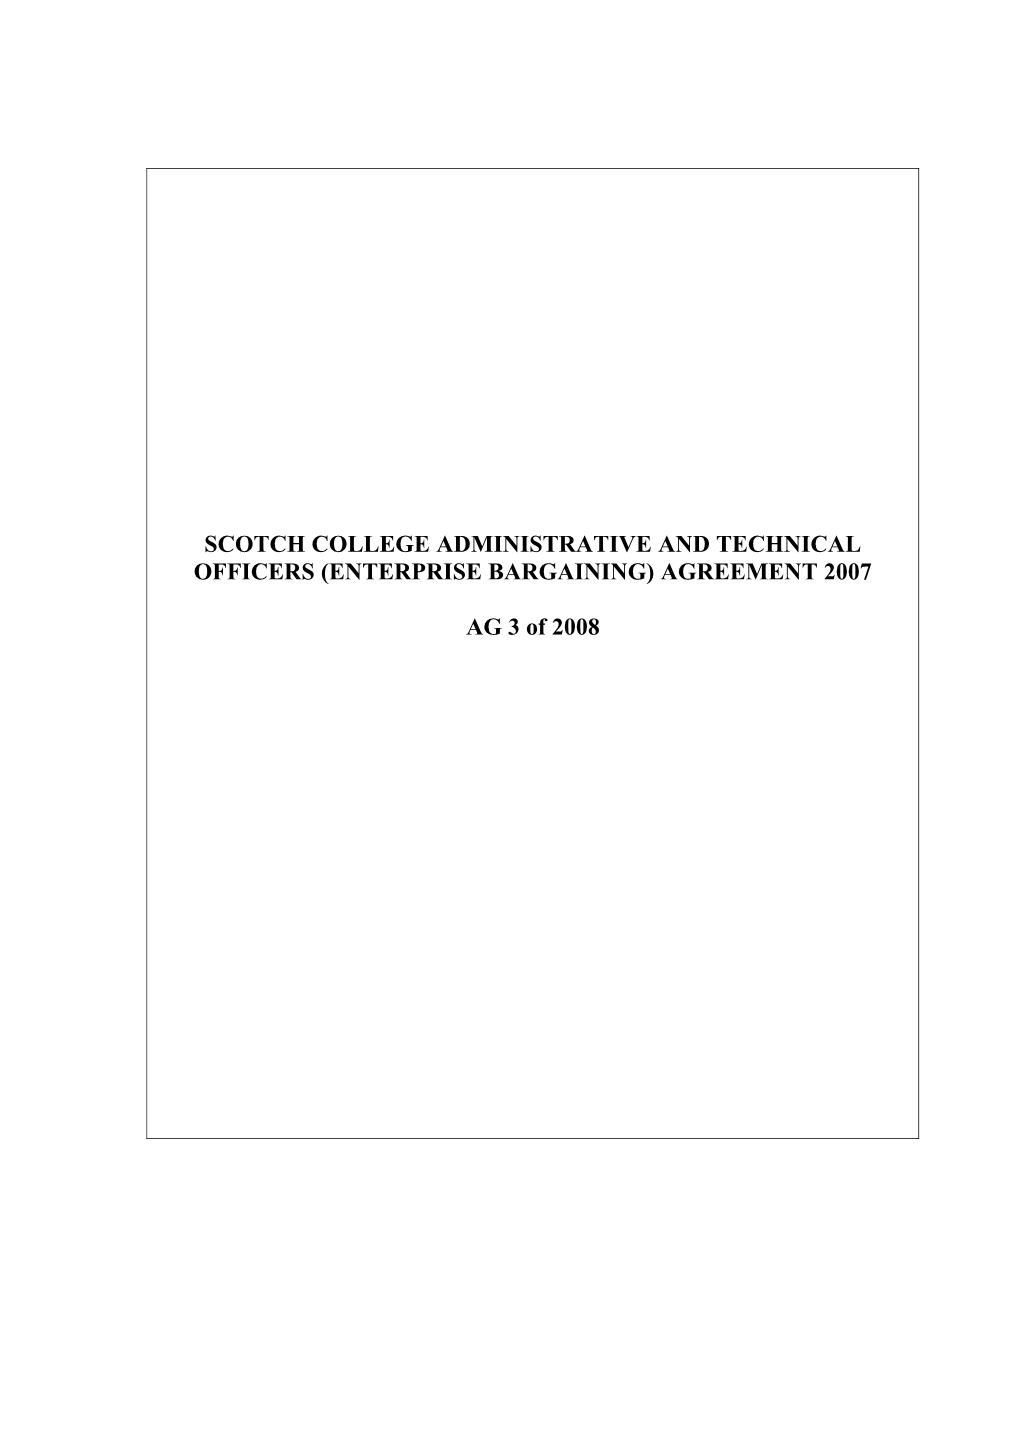 Scotch College Administrative and Technical Officers (Enterprise Bargaining) Agreement